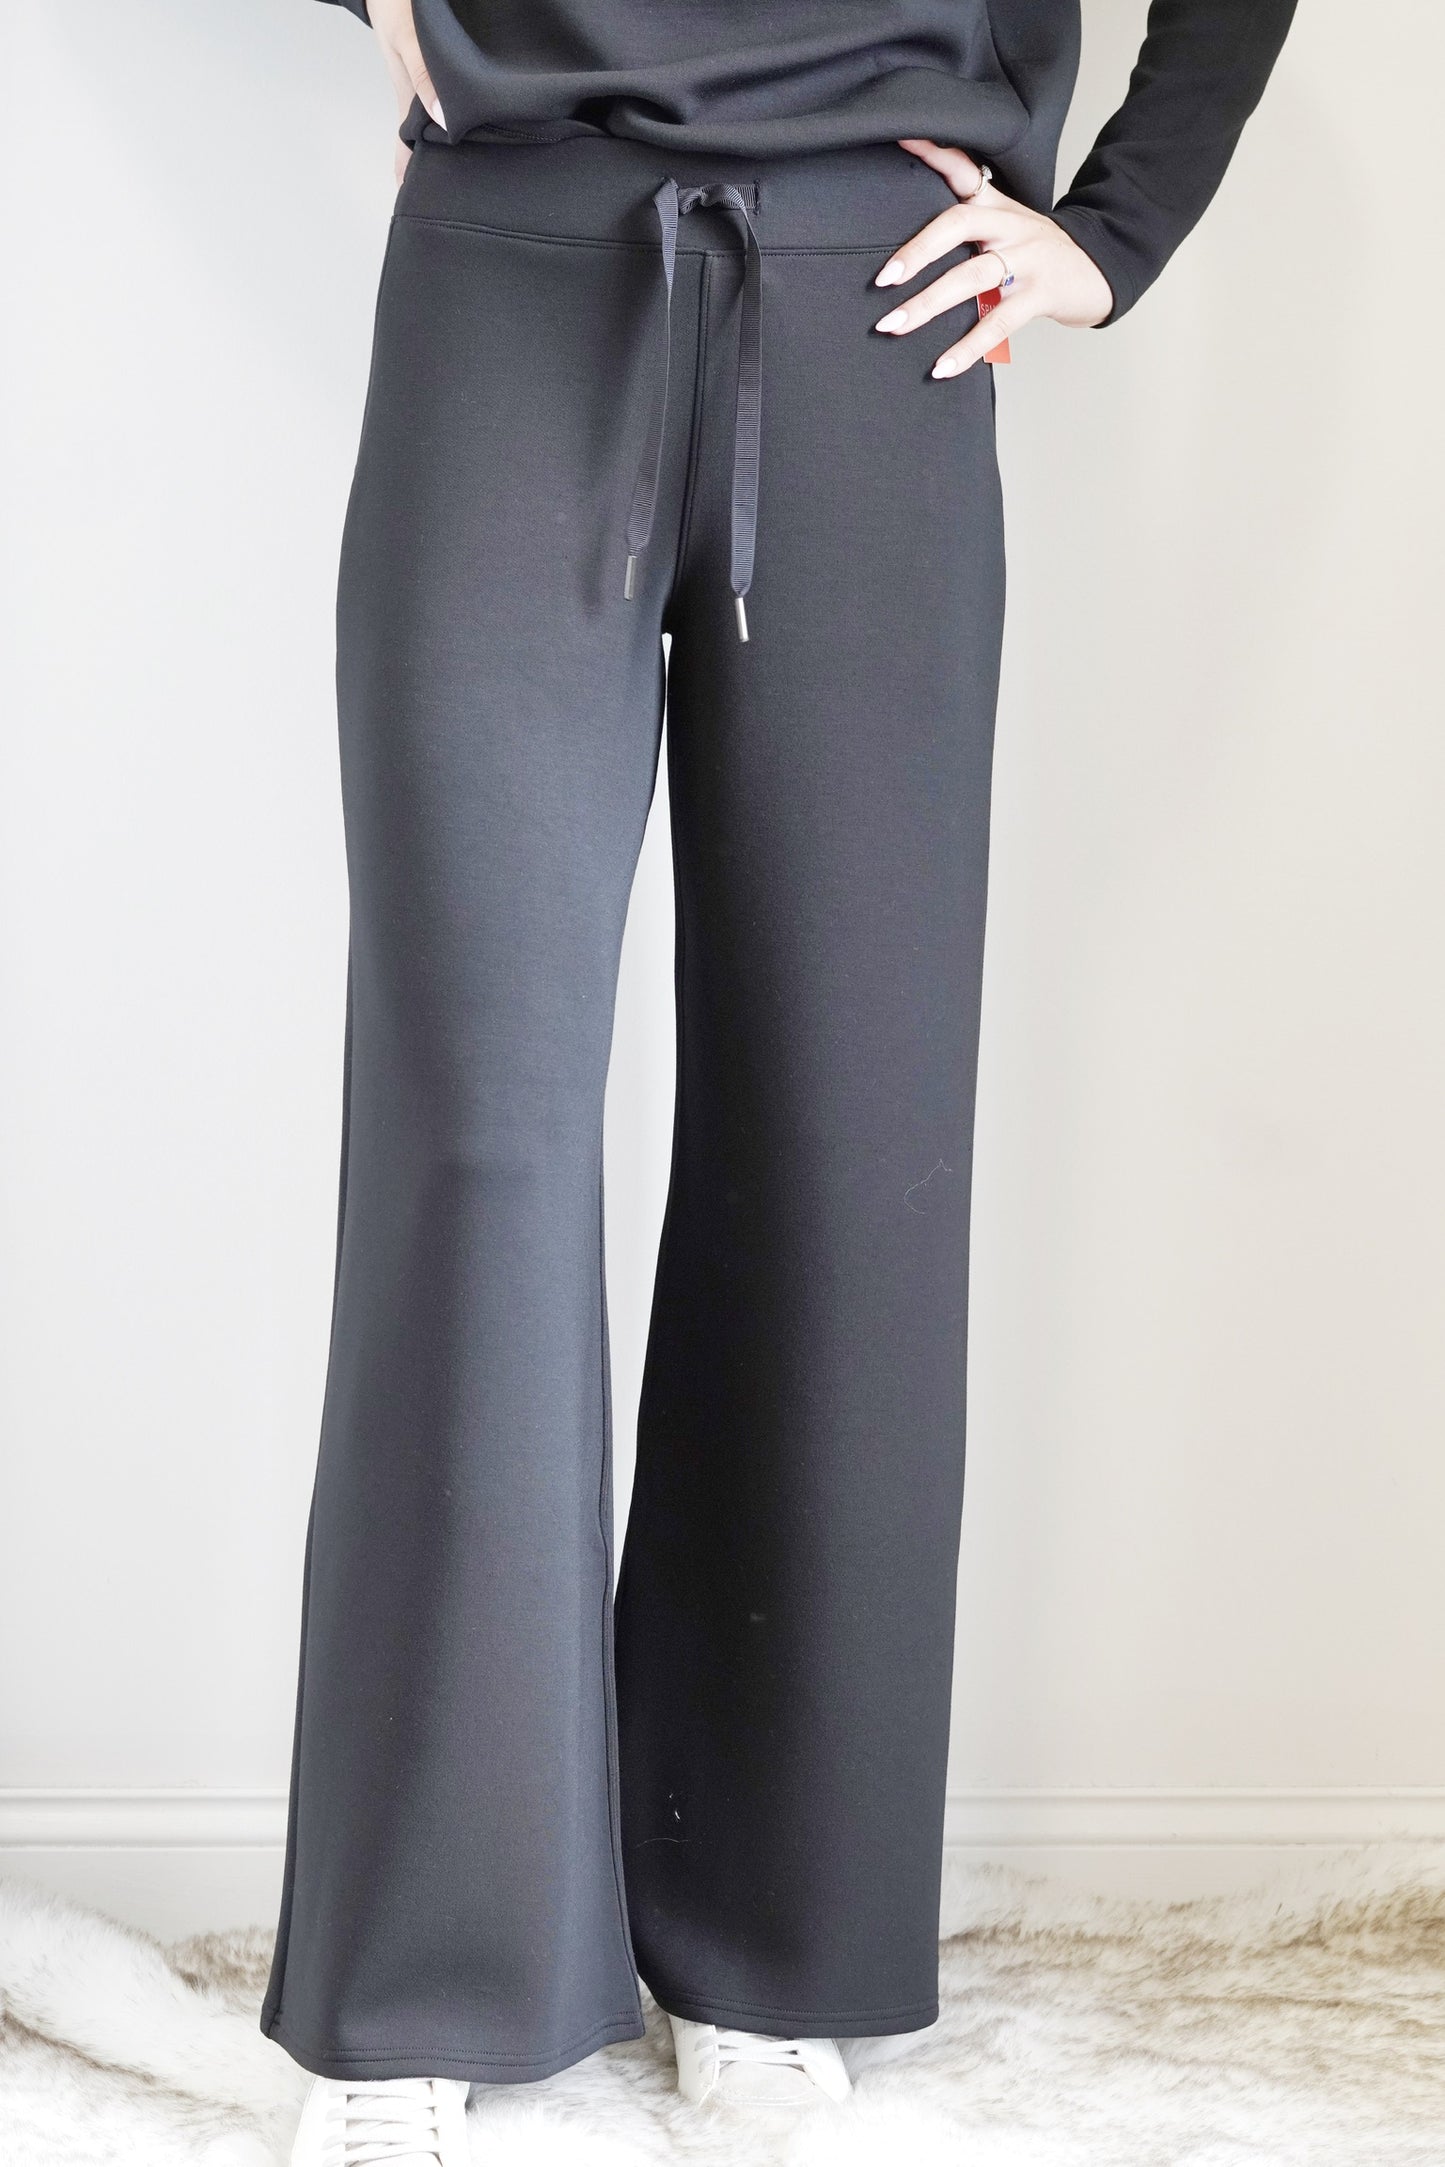 Spanx AirEssentials Wide Leg Pant In Spice